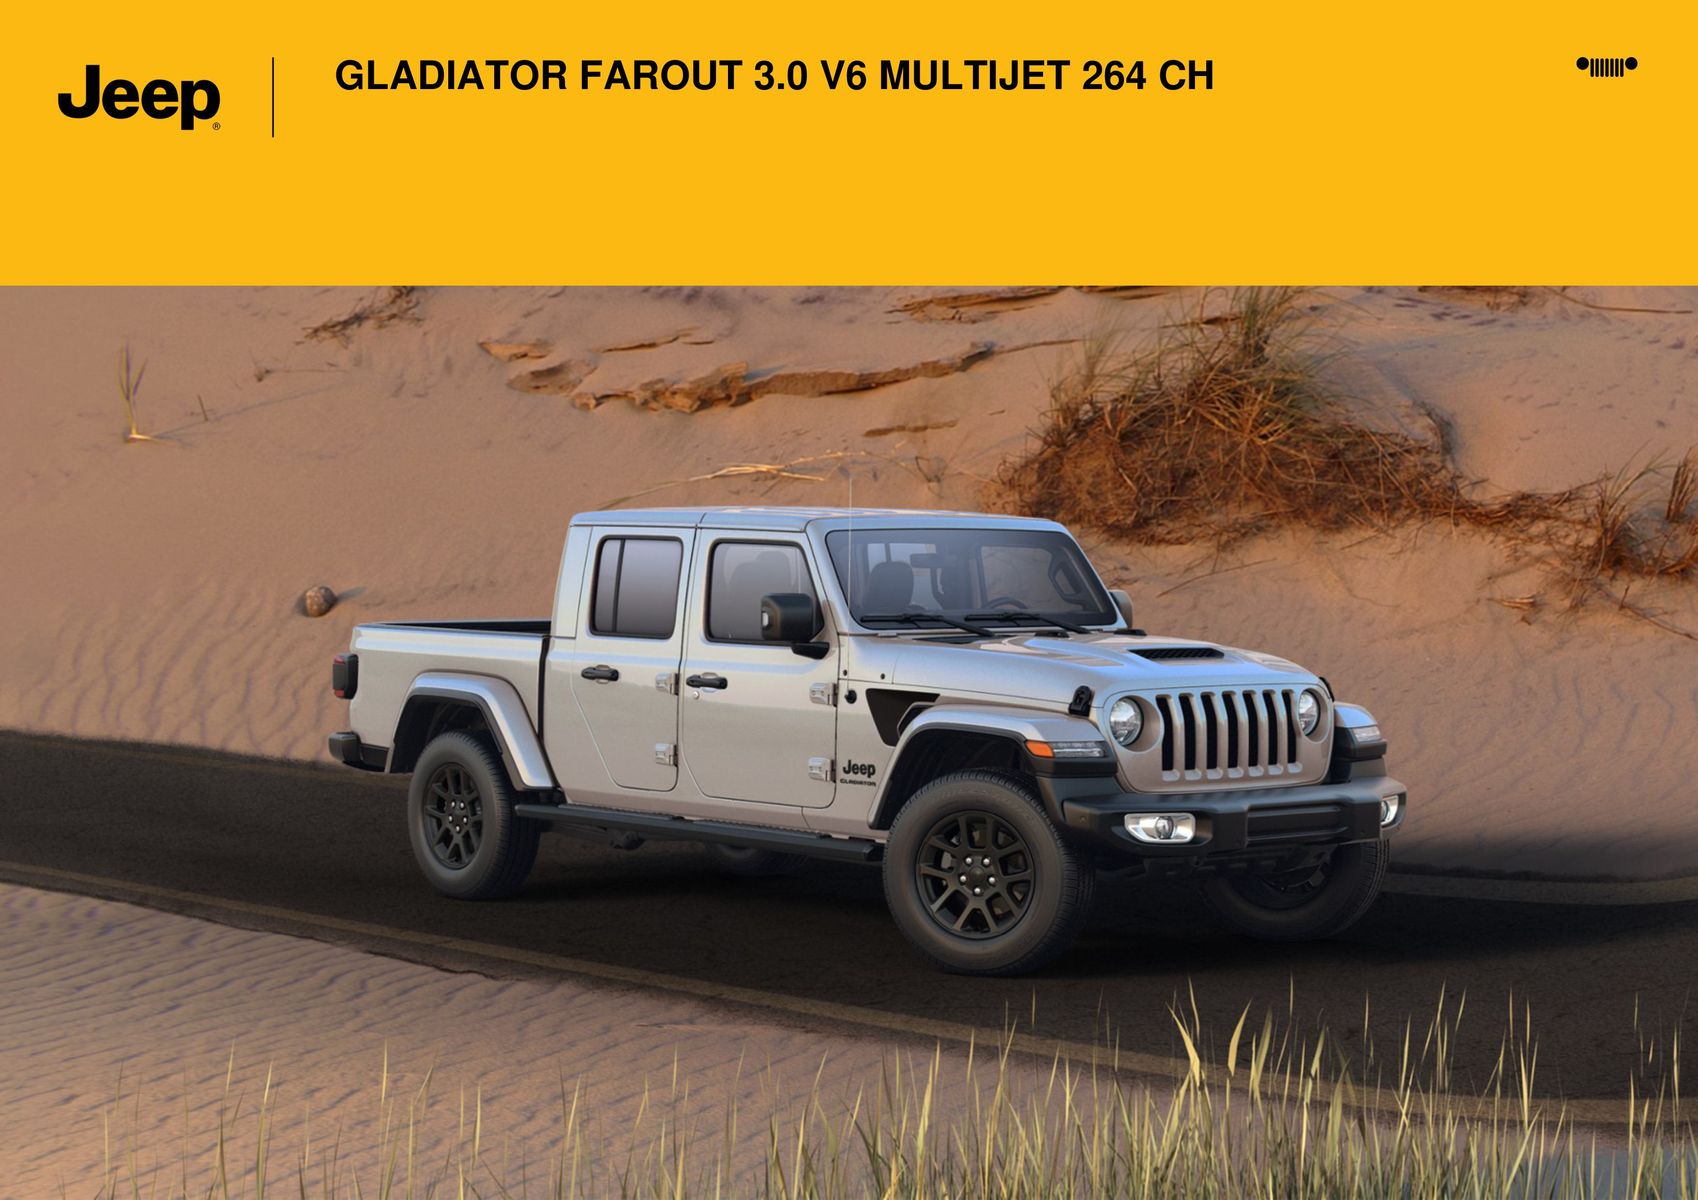 Catalogue GLADIATOR FAROUT 3.0 V6 MULTIJET 264 CH'', page 00001